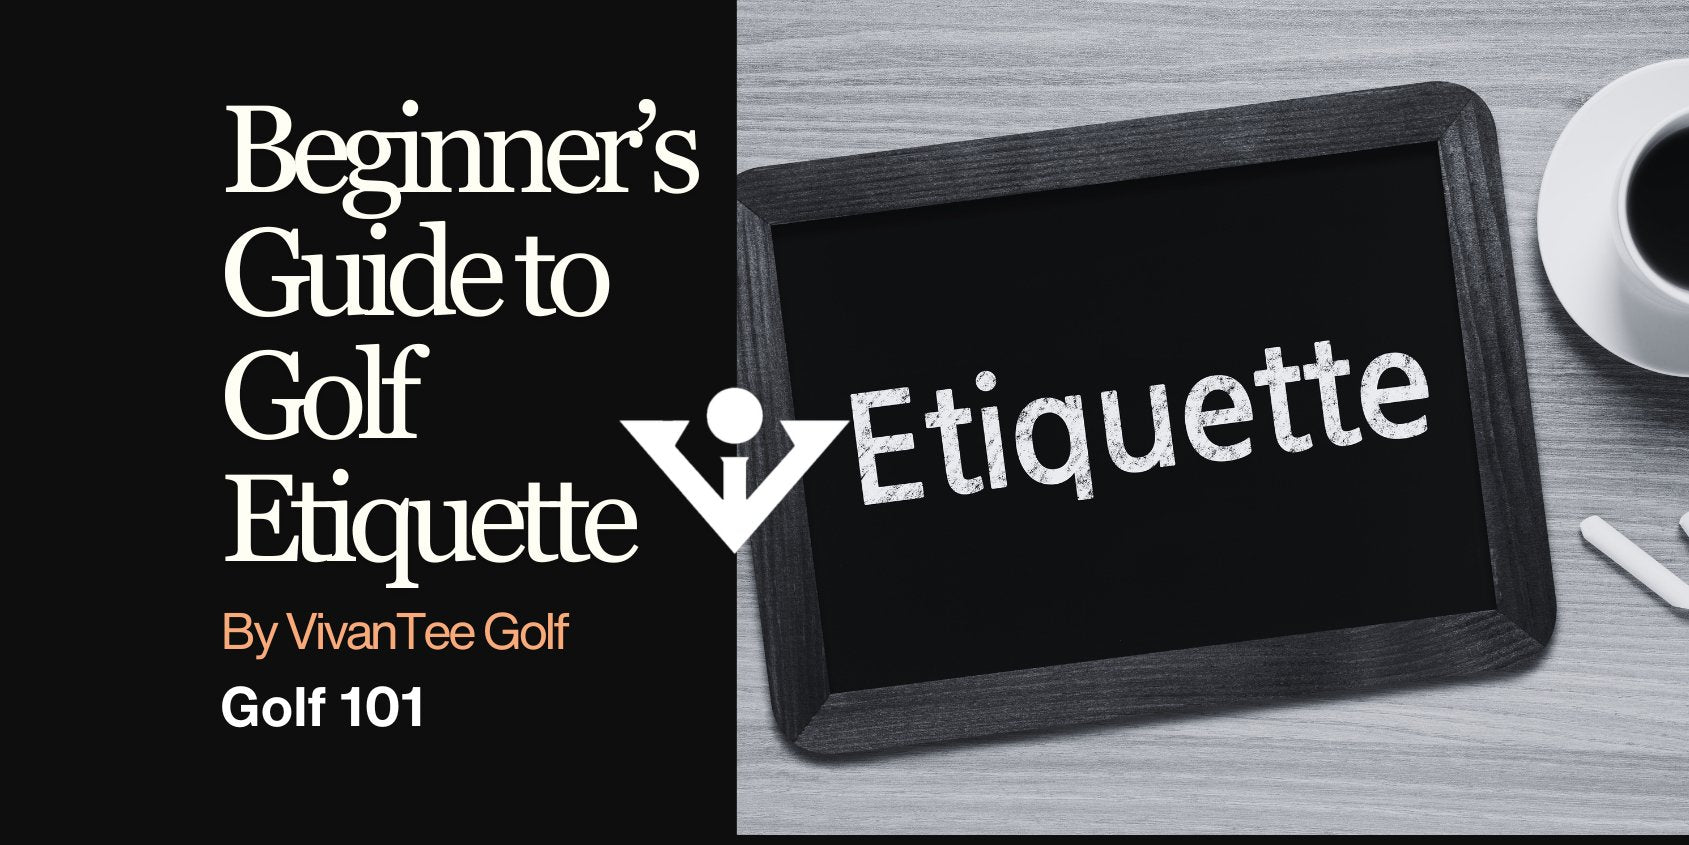 Golf Etiquette 101, beginner's guide to all things golf etiquette